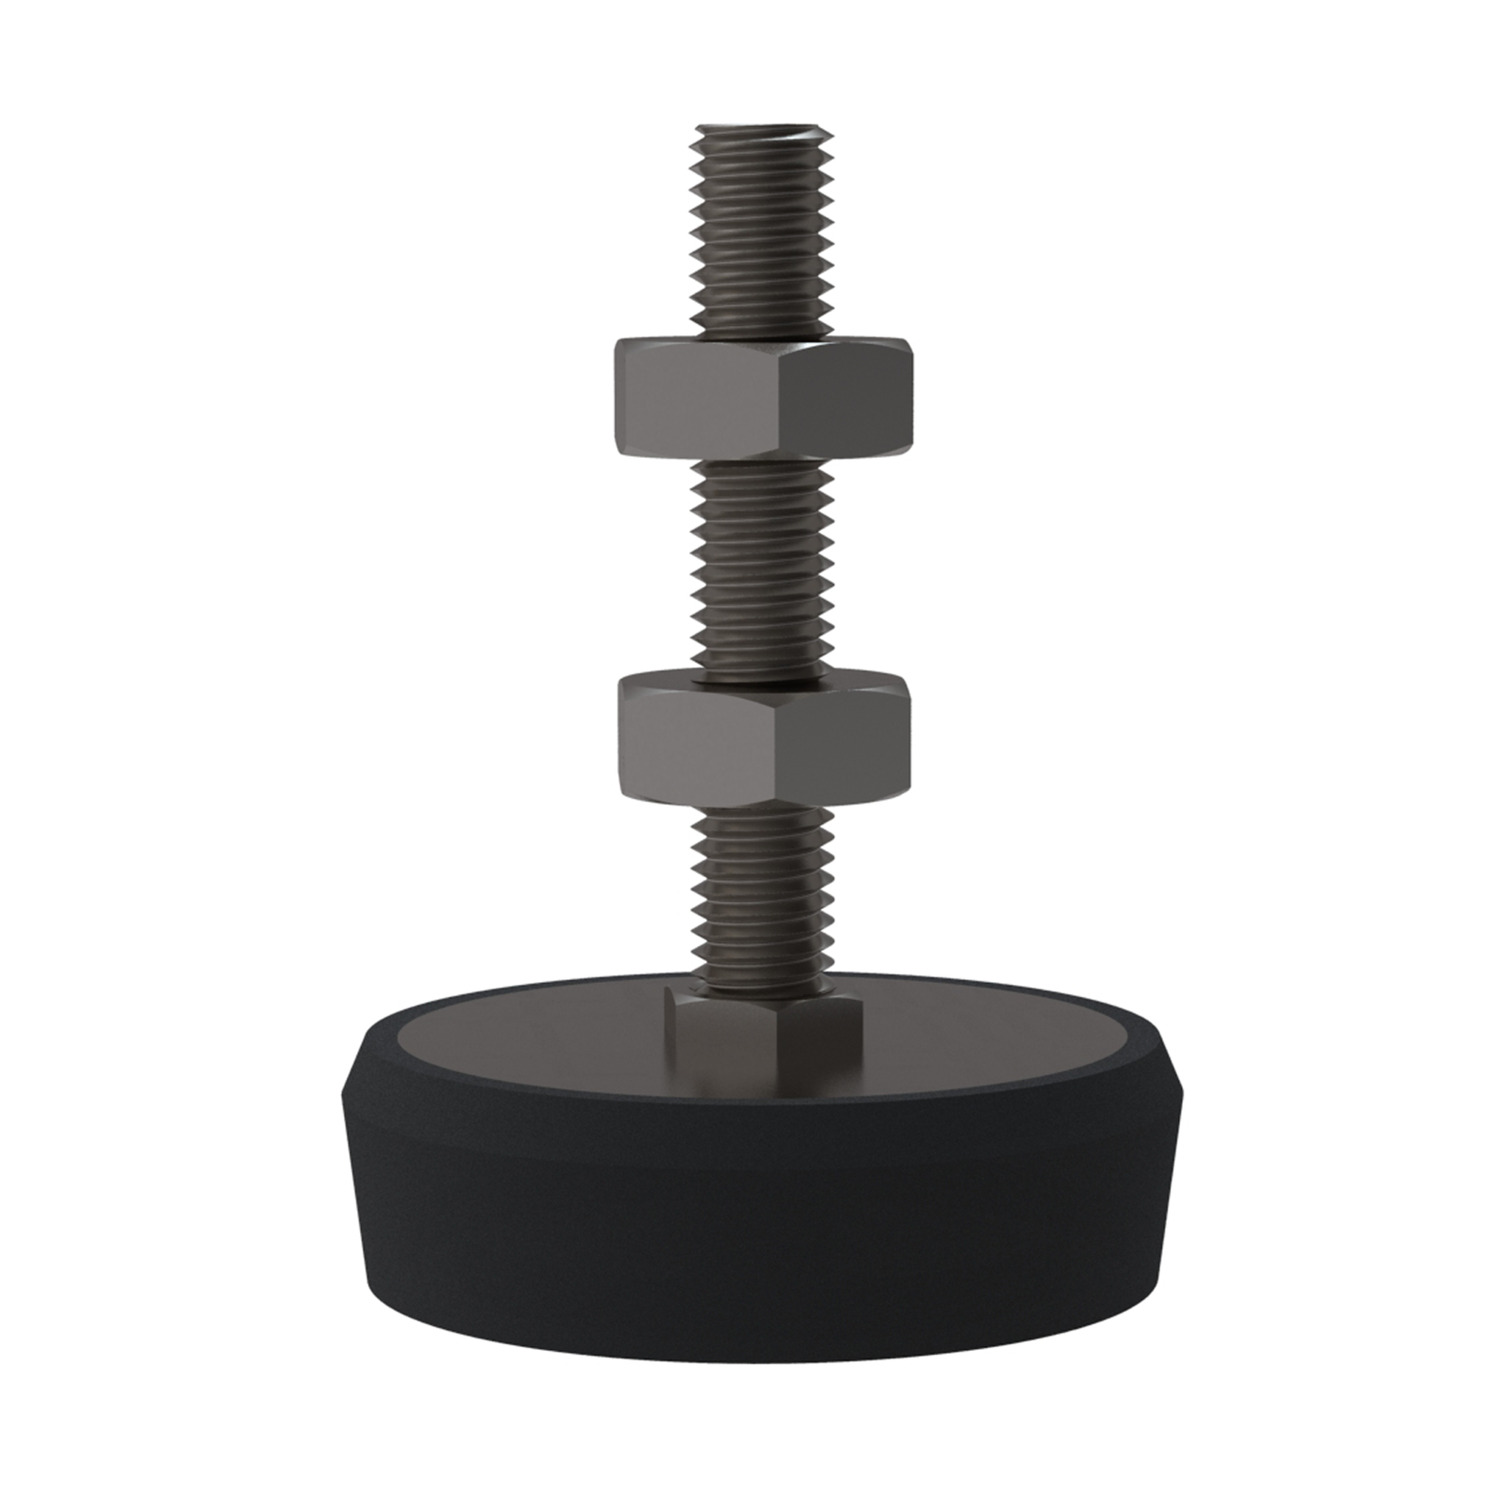 Stainless Machine Mounts Stainless steel Machine Mounts with either rubber or polyurethane bases. See also our levelling feet range.